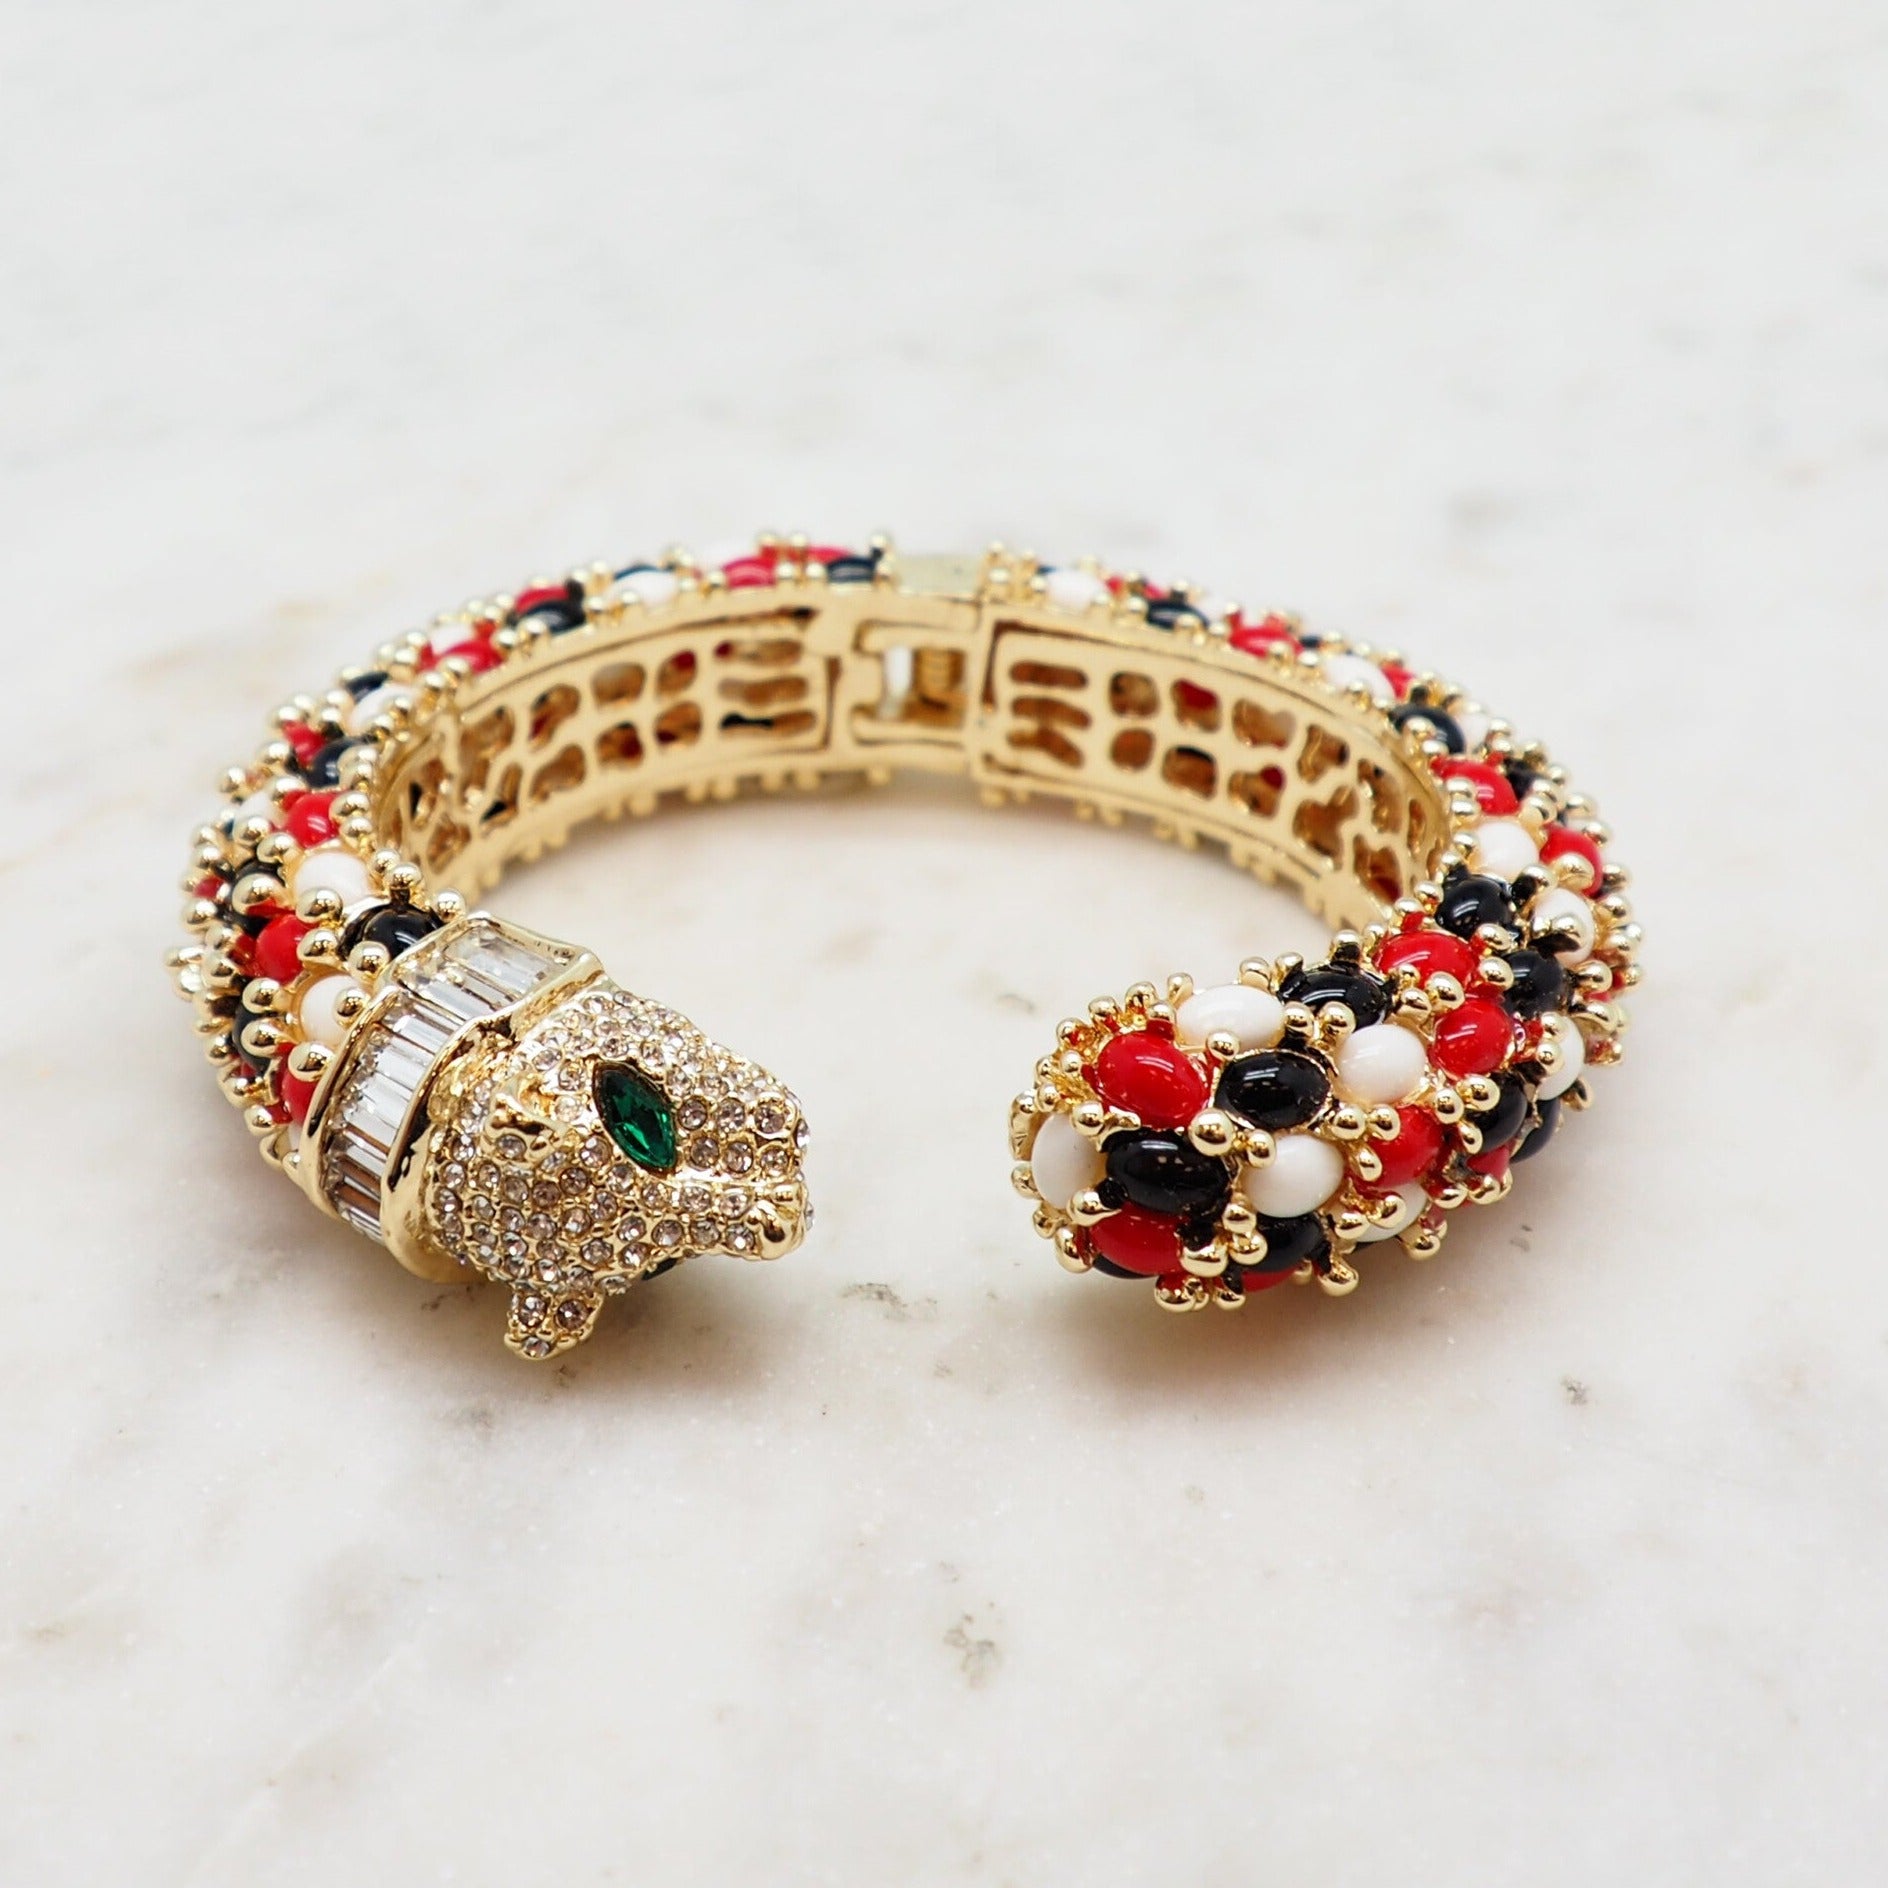 The Tiger Bangle - Red, Black and White